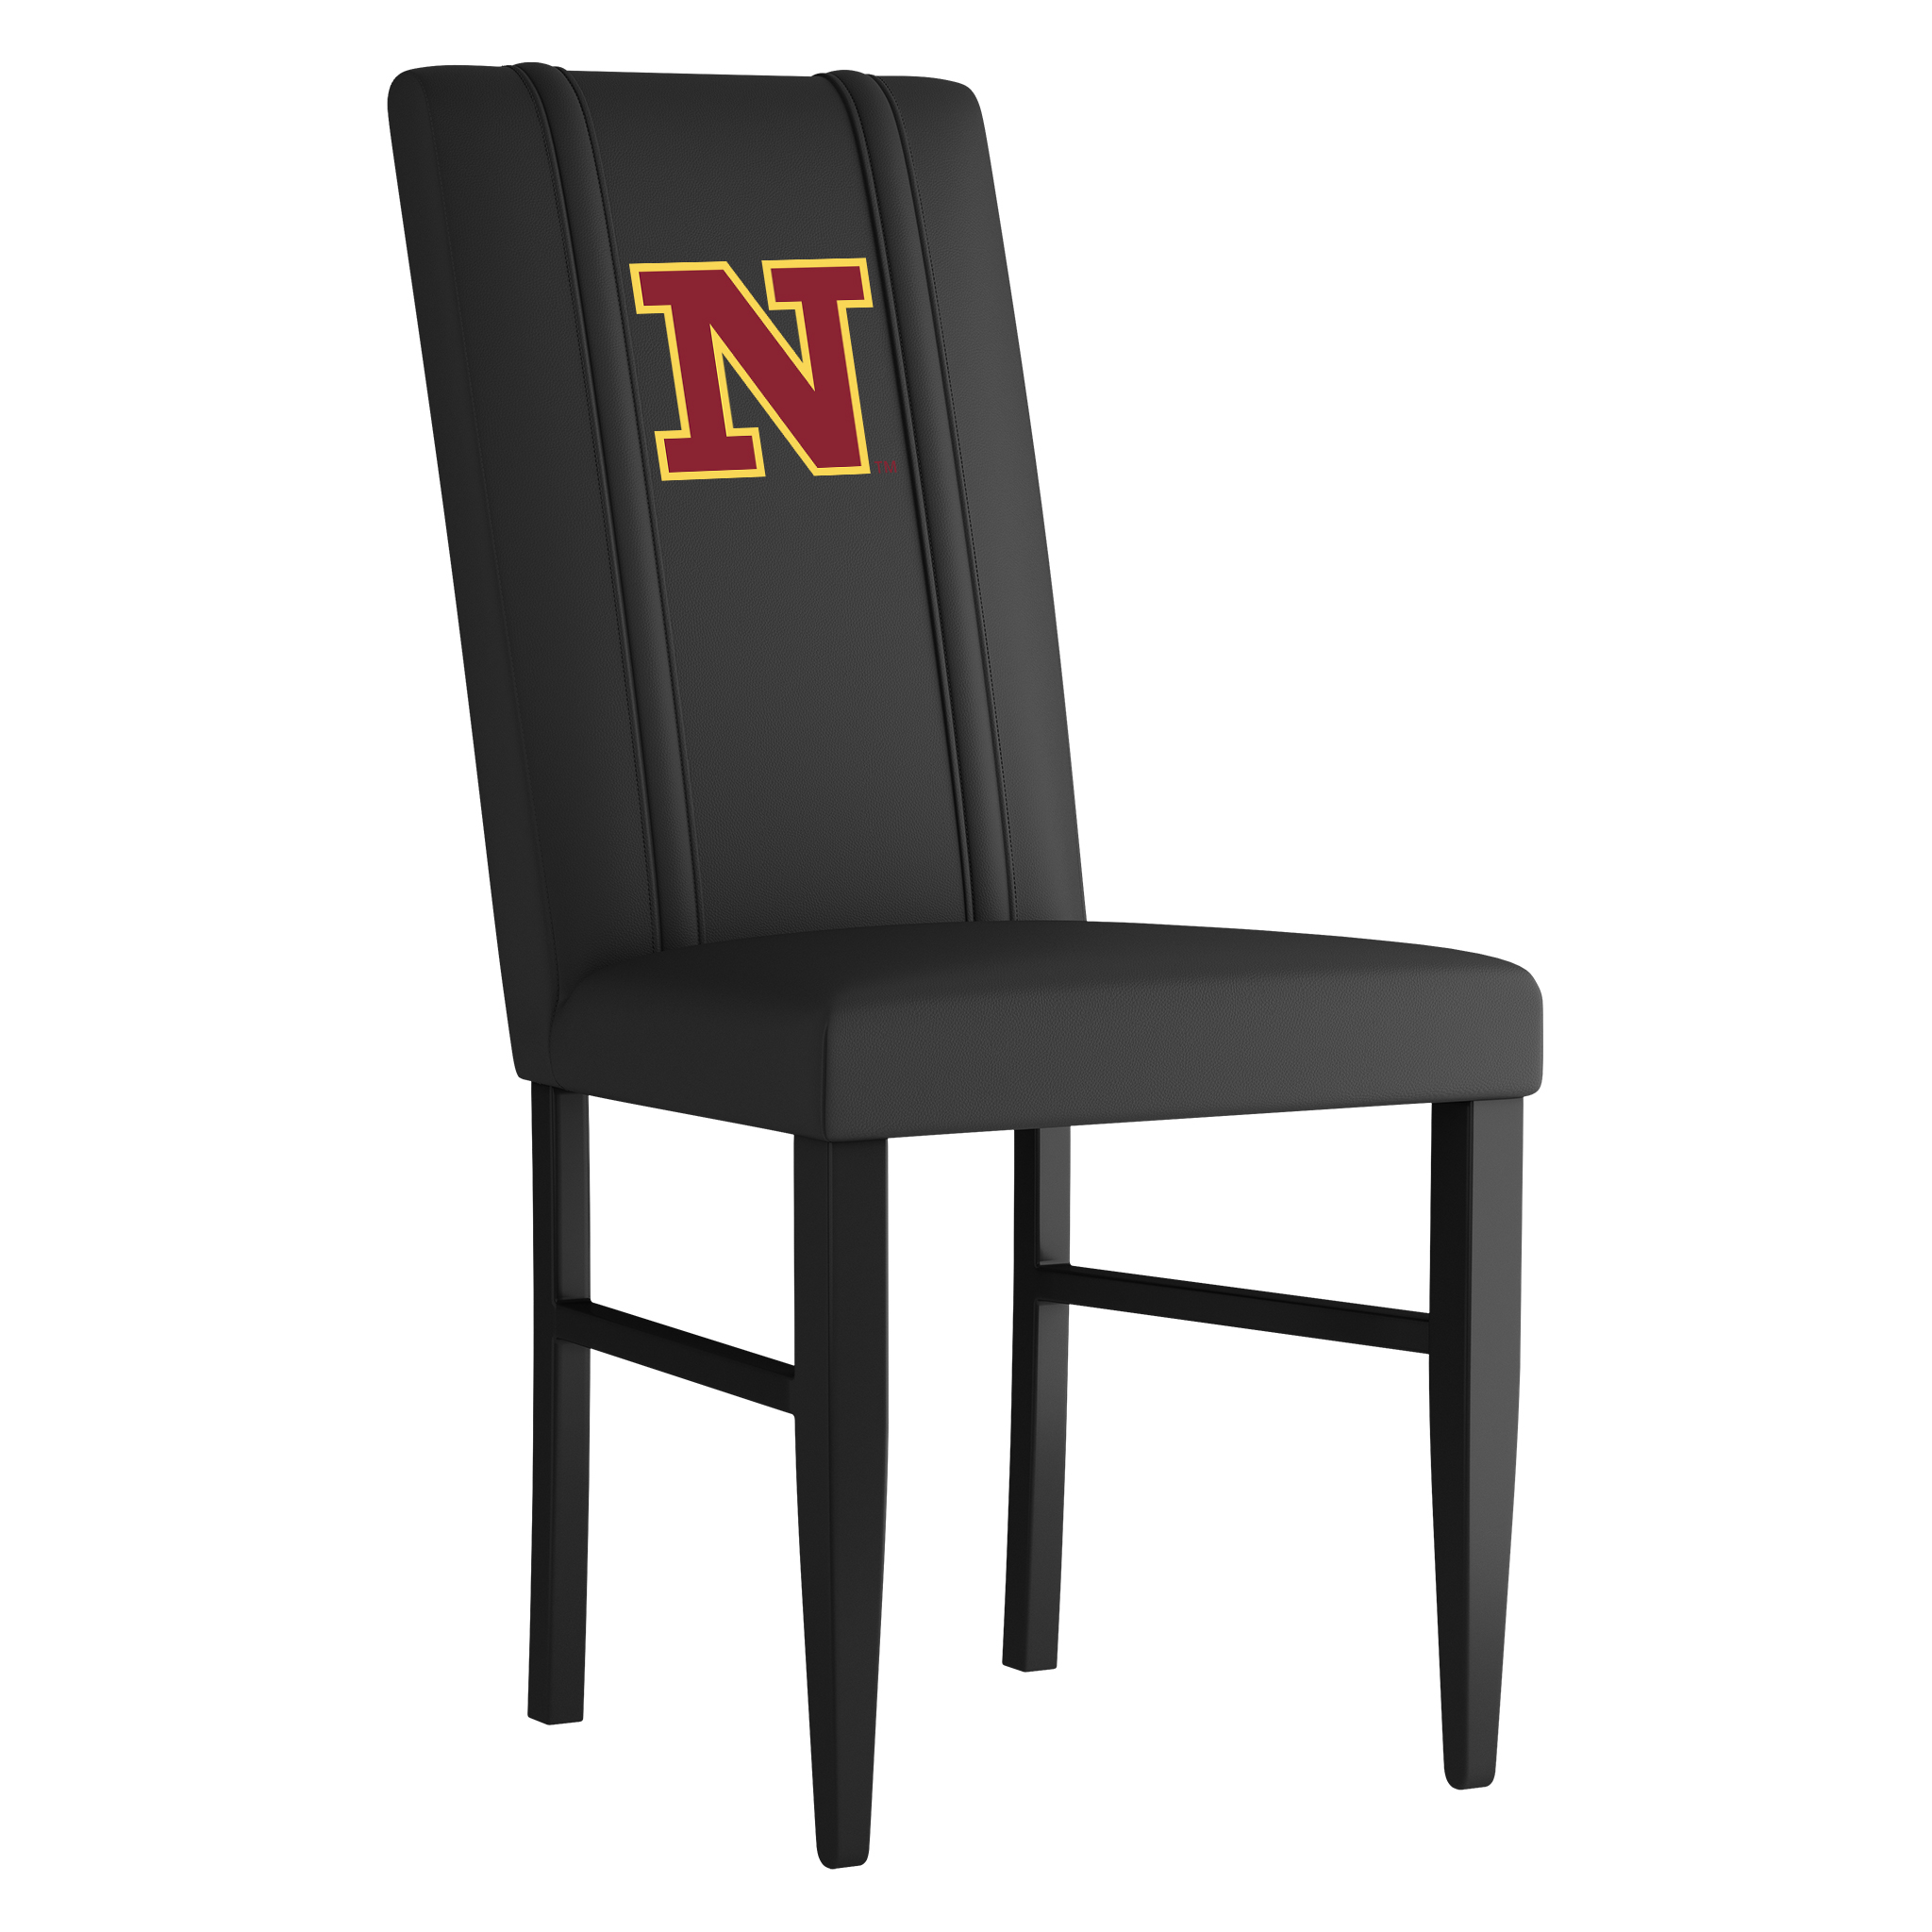 Northern State Side Chair 2000 With Northern State N Logo Panel